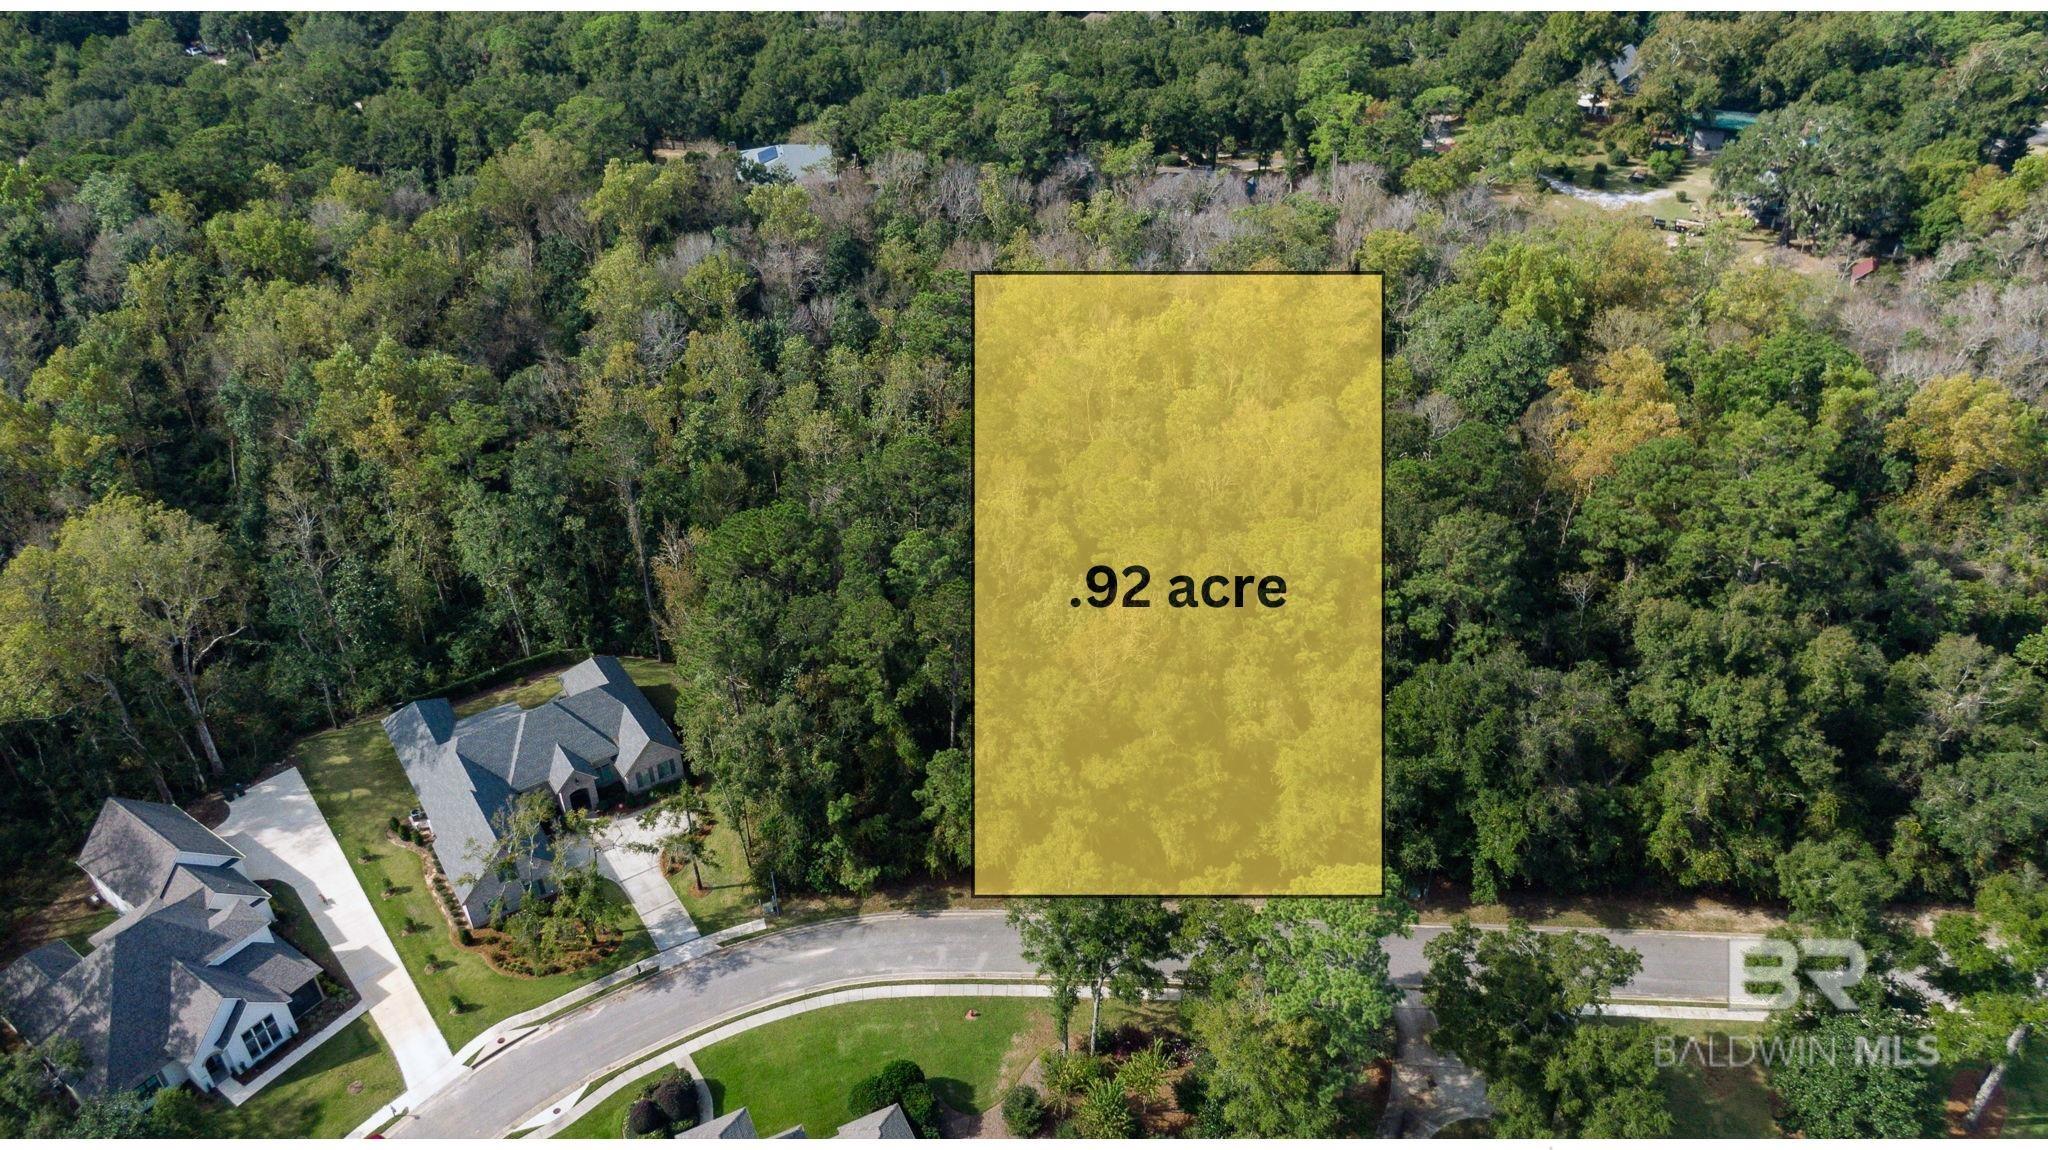 If you have ever dreamed of owning a beautiful lot in Point Clear, here is your opportunity. Polo Ridge Subdivision is located minutes from Mobile Bay, downtown Fairhope, schools, shopping and so much more.  You will be conveniently located near the Grand Hotel, Fairhope pier and Lakewood Golf course. This secluded and low traffic community is in Fairhope school district  Build your dream home and enjoy all that the Eastern Shore has to offer. All information provided is deemed reliable but not guaranteed. Seller is willing to have a delineation done with a reasonable offer.